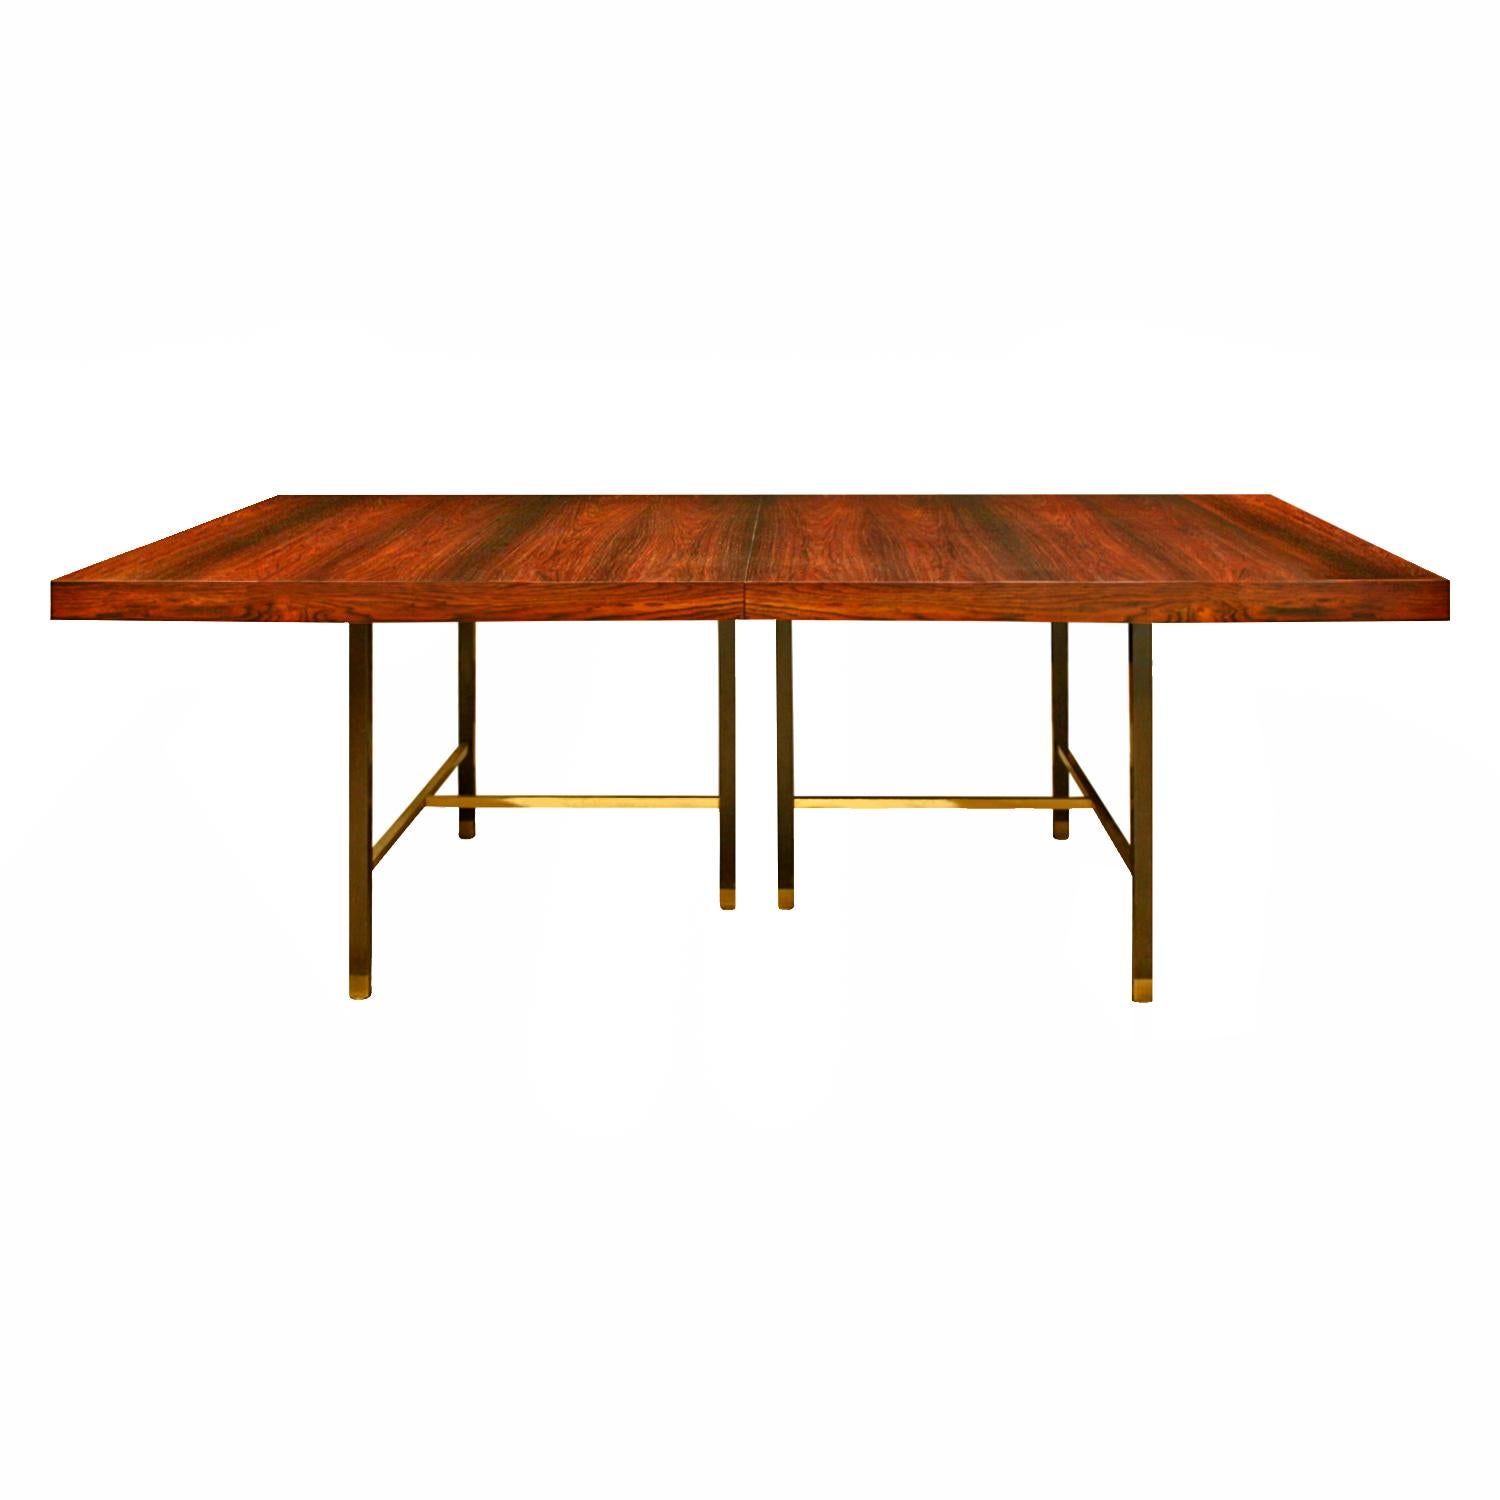 Dining table No. 1287 in book-matched Brazilian rosewood with brass stretchers and mahogany legs by Harvey Probber, American 1950's. Comes with 2 additional leaves. Signed with label on bottom that reads “Furniture designed by Harvey Probber”. This